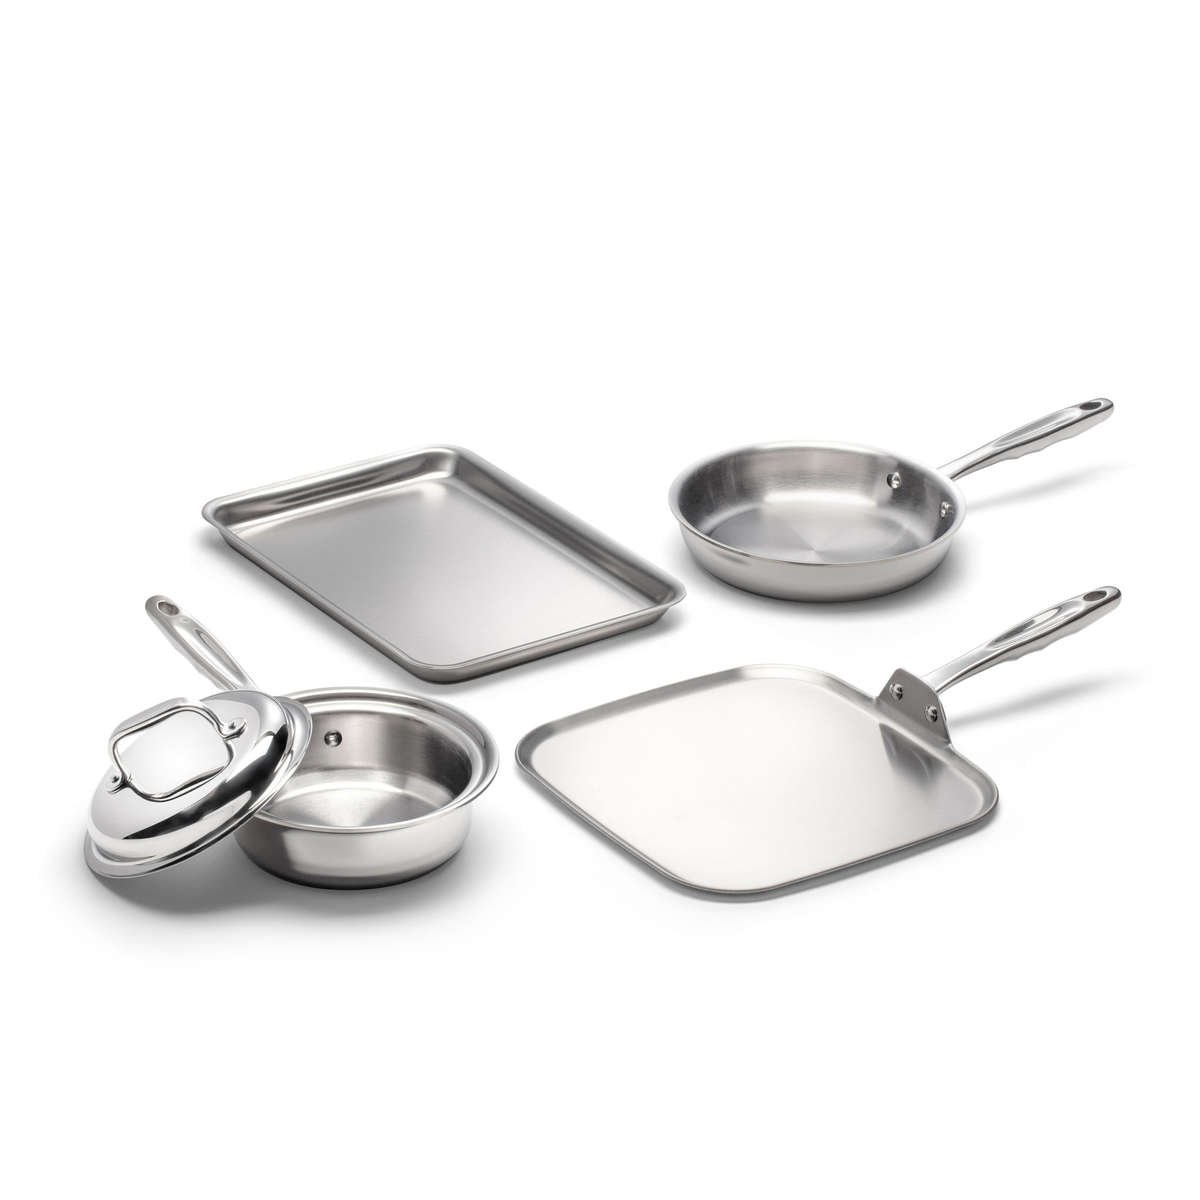 360 Cookware stainless steel pans and bakeware